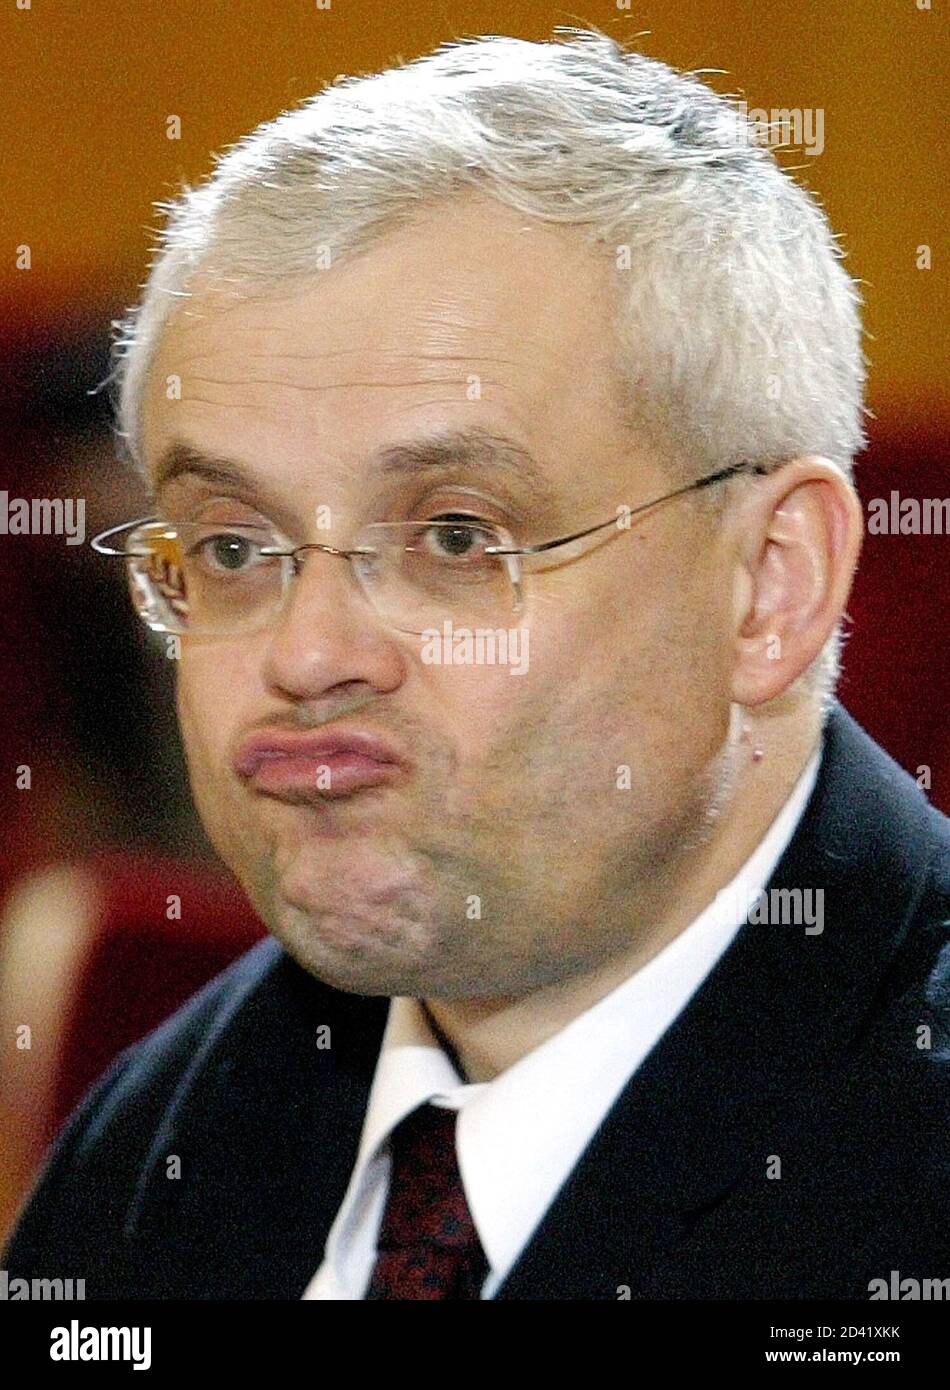 Czech Prime Minister Vladimir Spidla grimaces at the end of the parlimentary session to elect Vaclav Havel's successor ended at Prague Castle January 24,2003. The second Czech parliamentary attempt to elect Havel's successor ended in a political stalemate. Former right-wing Prime Minister Vaclav Klaus obtained 127 votes and was short by 14 votes to gain the parliamentary majority and his opponent, senator Jaroslava Moserova received 65 votes. REUTERS/Petr Josek  PJ Stock Photo